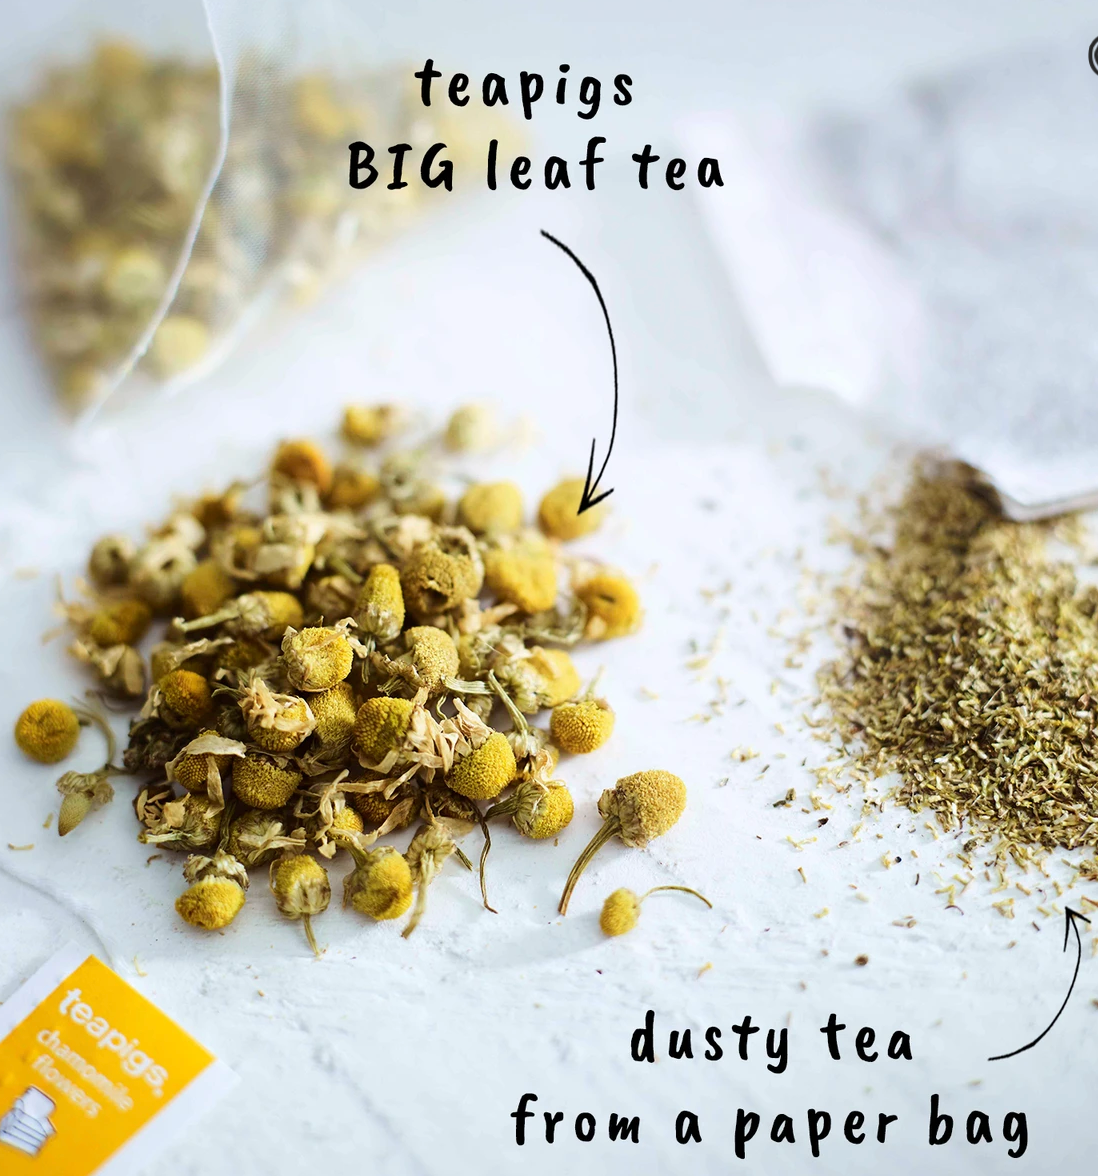 There are chamomile leaves and flowers gathered on a surface. There's an arrow pointing toward them with the words "teapigs BIG leaf tea." There is a pile of ground tea leaves with an arrow pointed toward them that says "dusty tea from a paper bag."